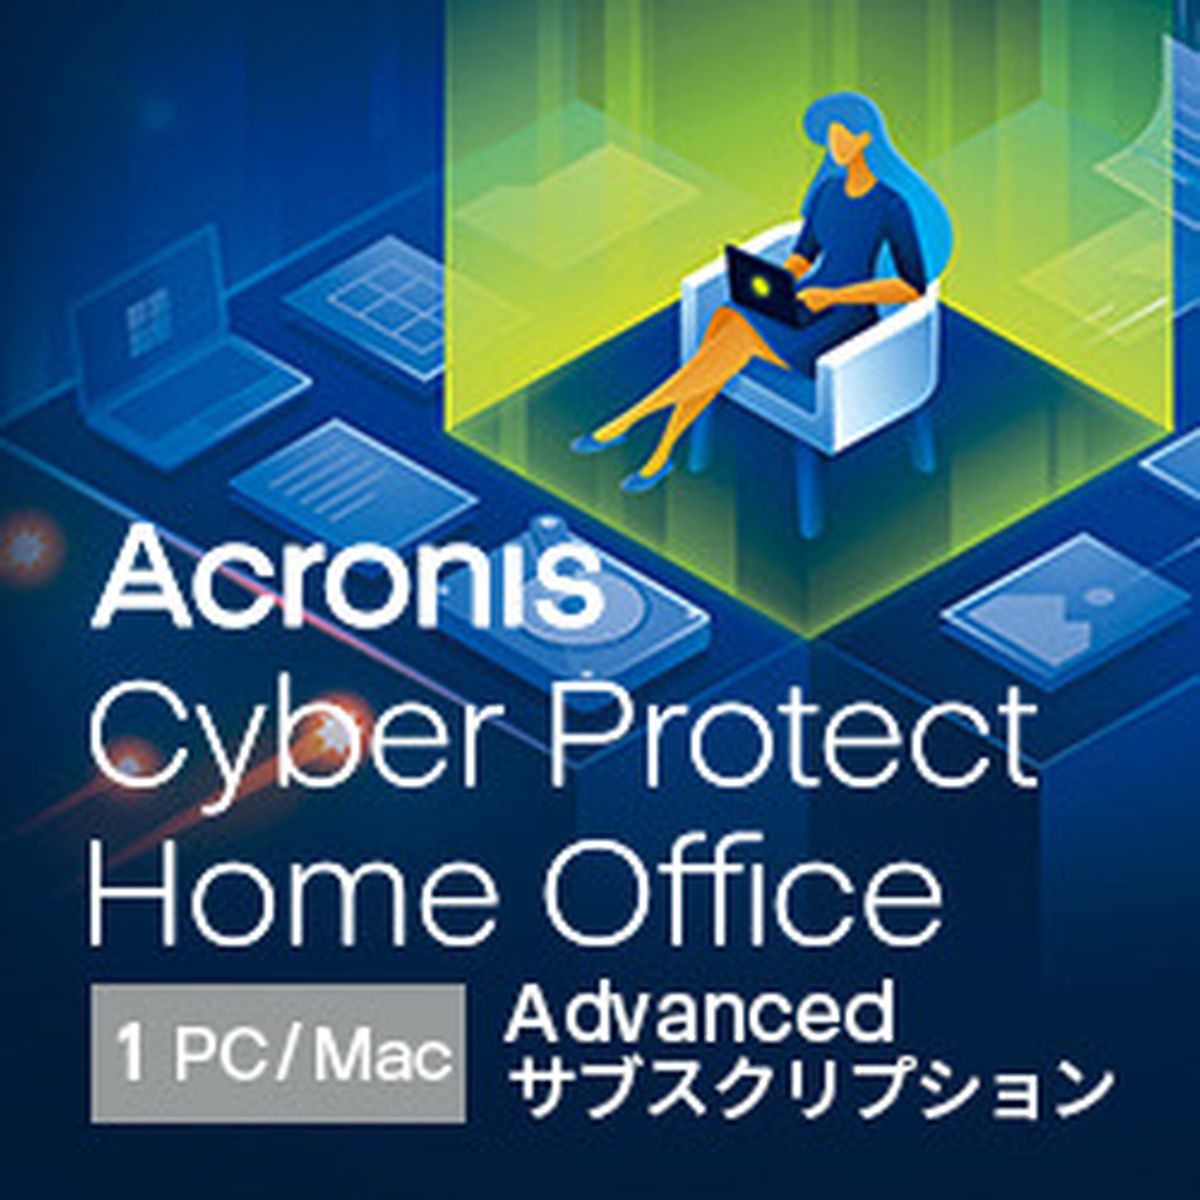 Cyber Protect Home Office Advanced - 1 Computer + 500 GB Acronis Cloud Storage - 1 year subscription ESD ダウンロード版